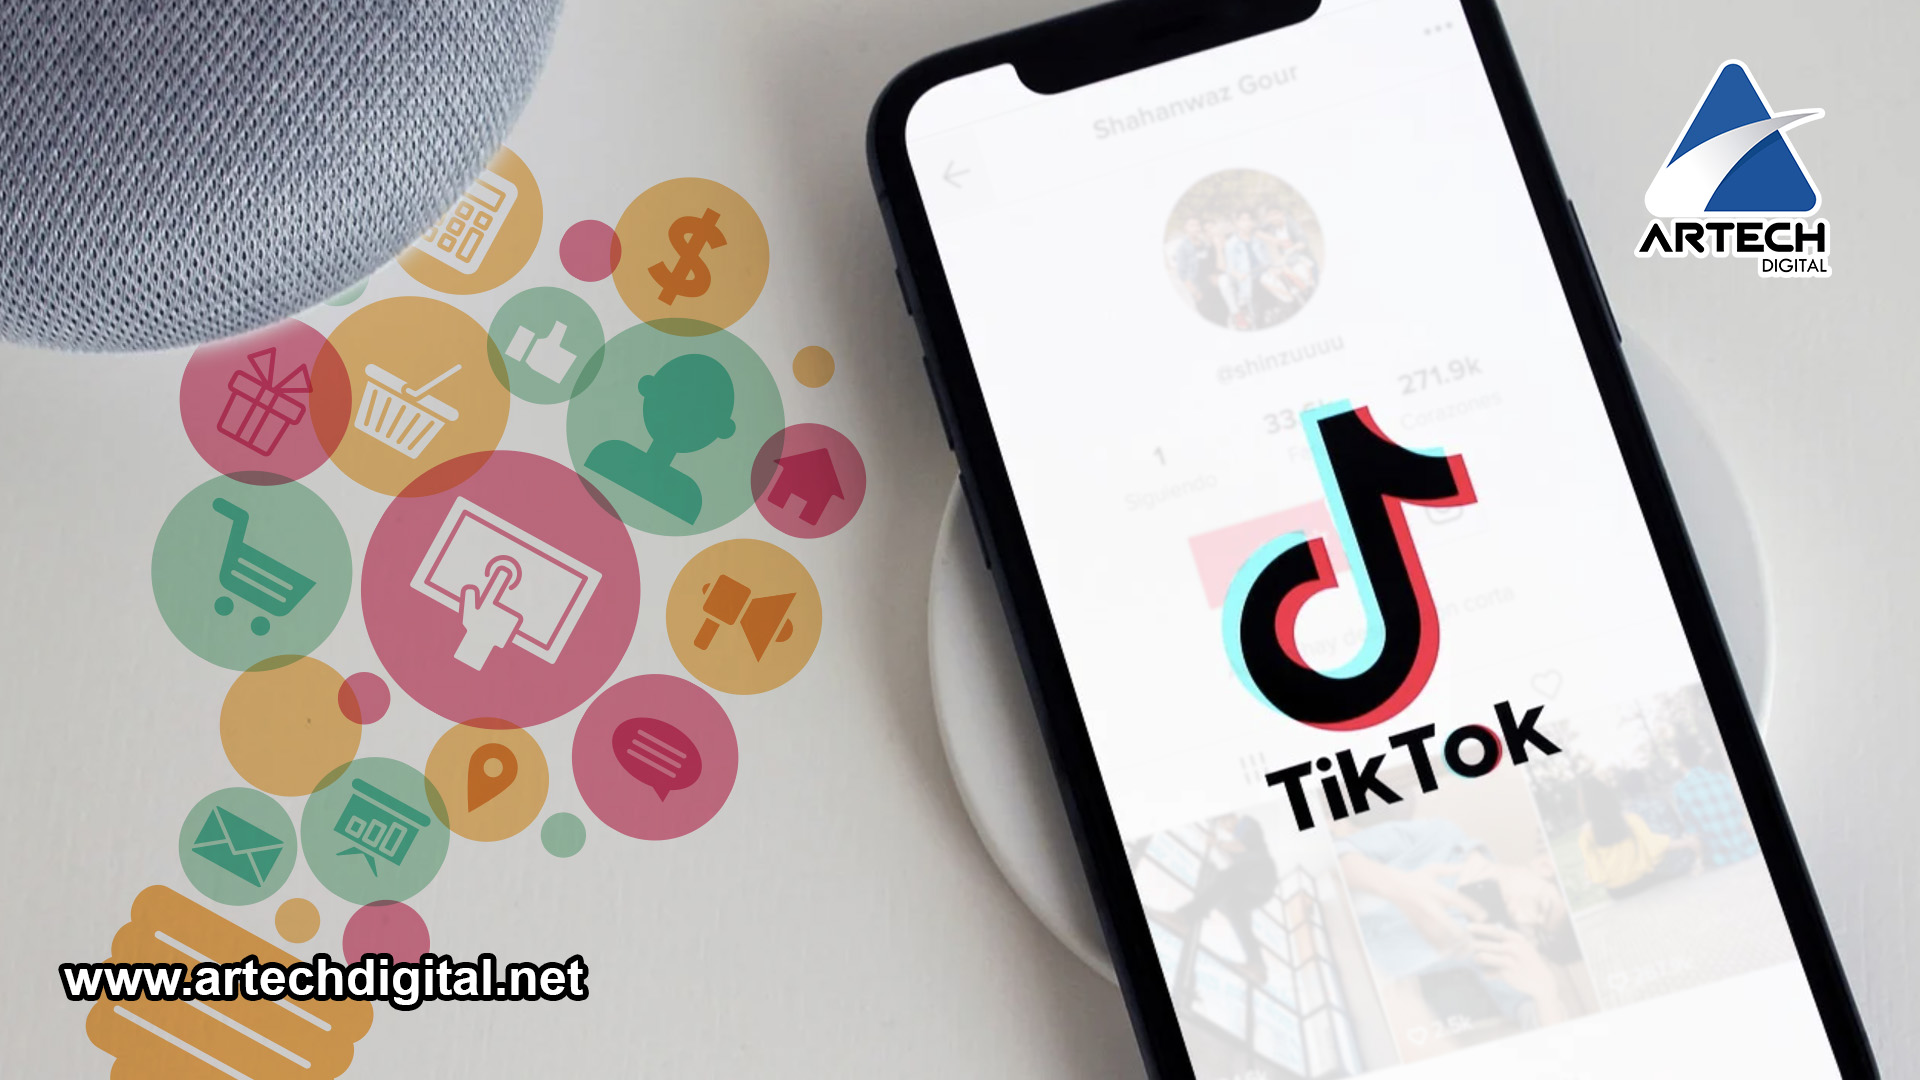 Marketing at TikTok: this is what you need to know - Artech Digital